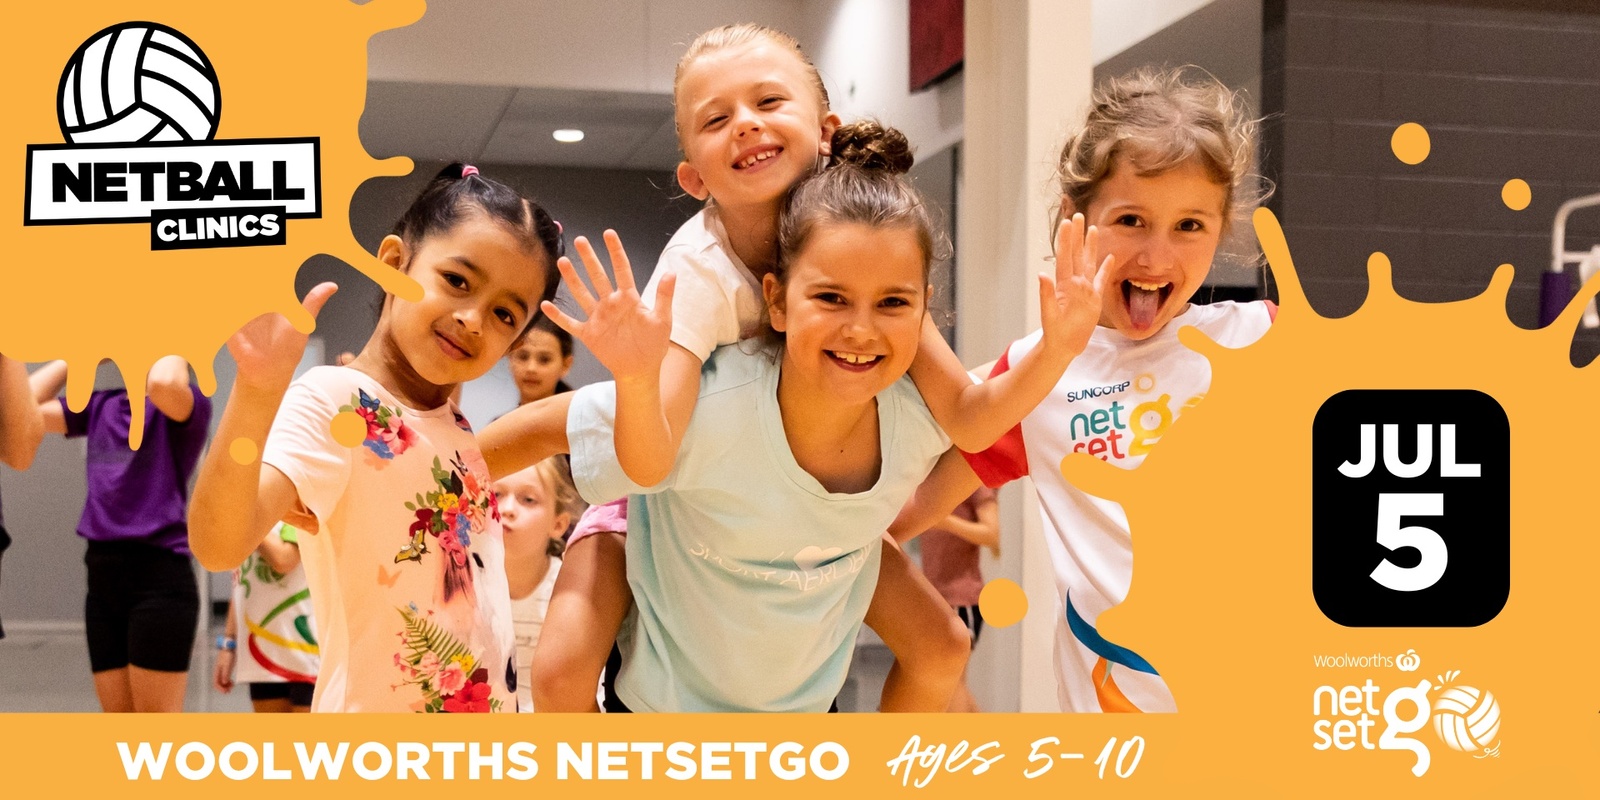 Banner image for WOOLWORTHS NETSETGO CLINIC - GOLD COAST LEISURE CENTRE - AGES 5 - 10